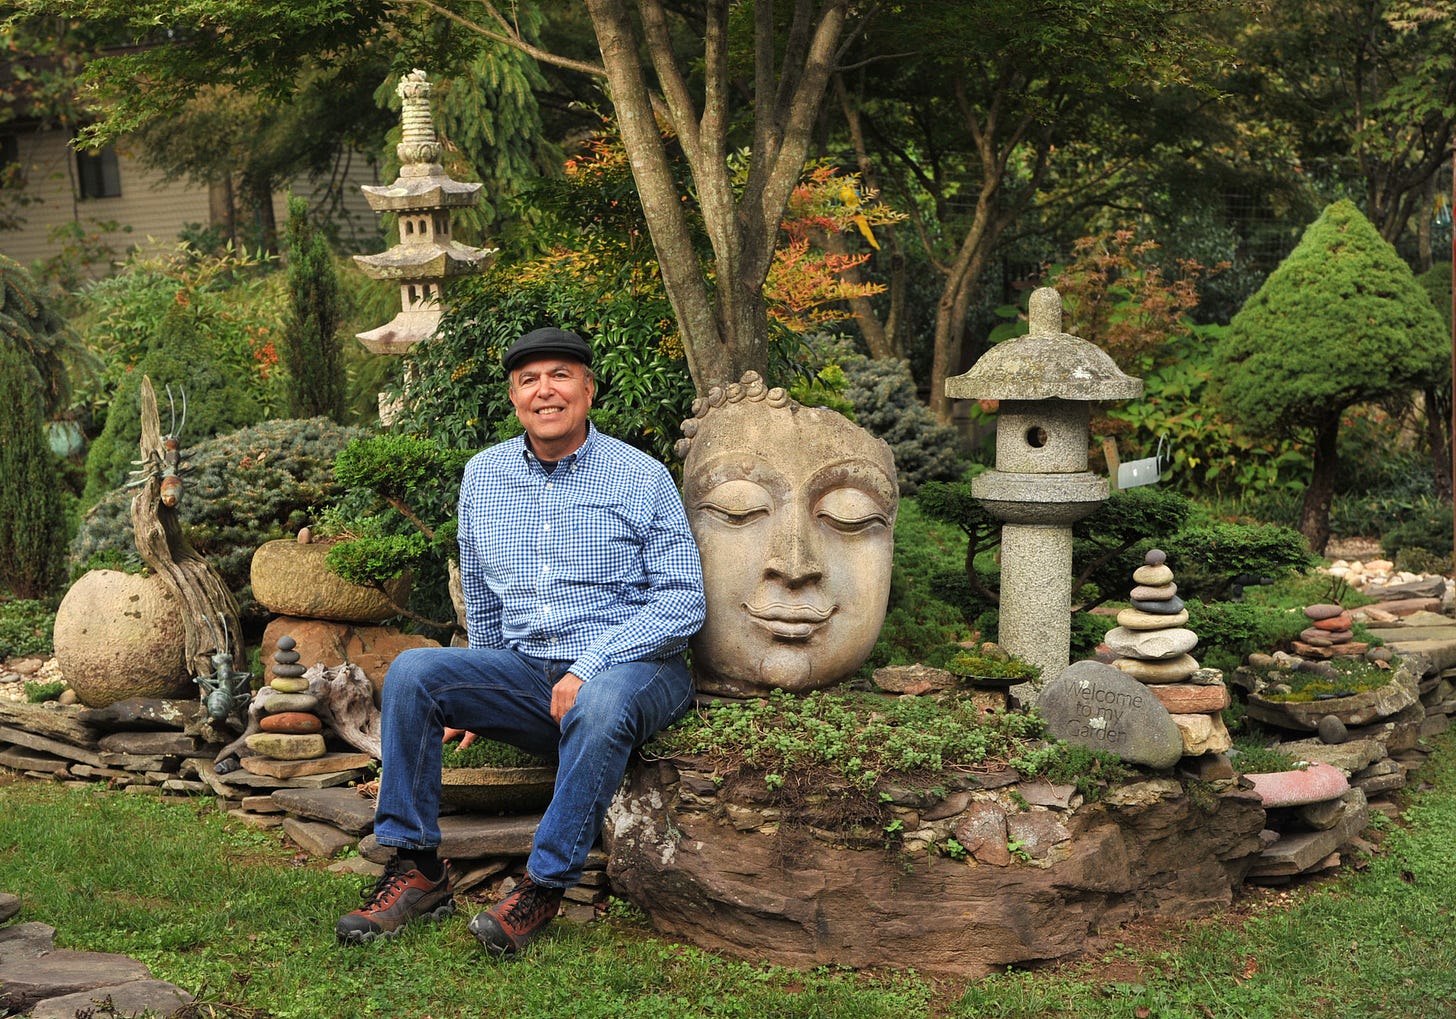 This Japanese garden in Reisterstown has been a labor of love for 35 years  - Baltimore Sun